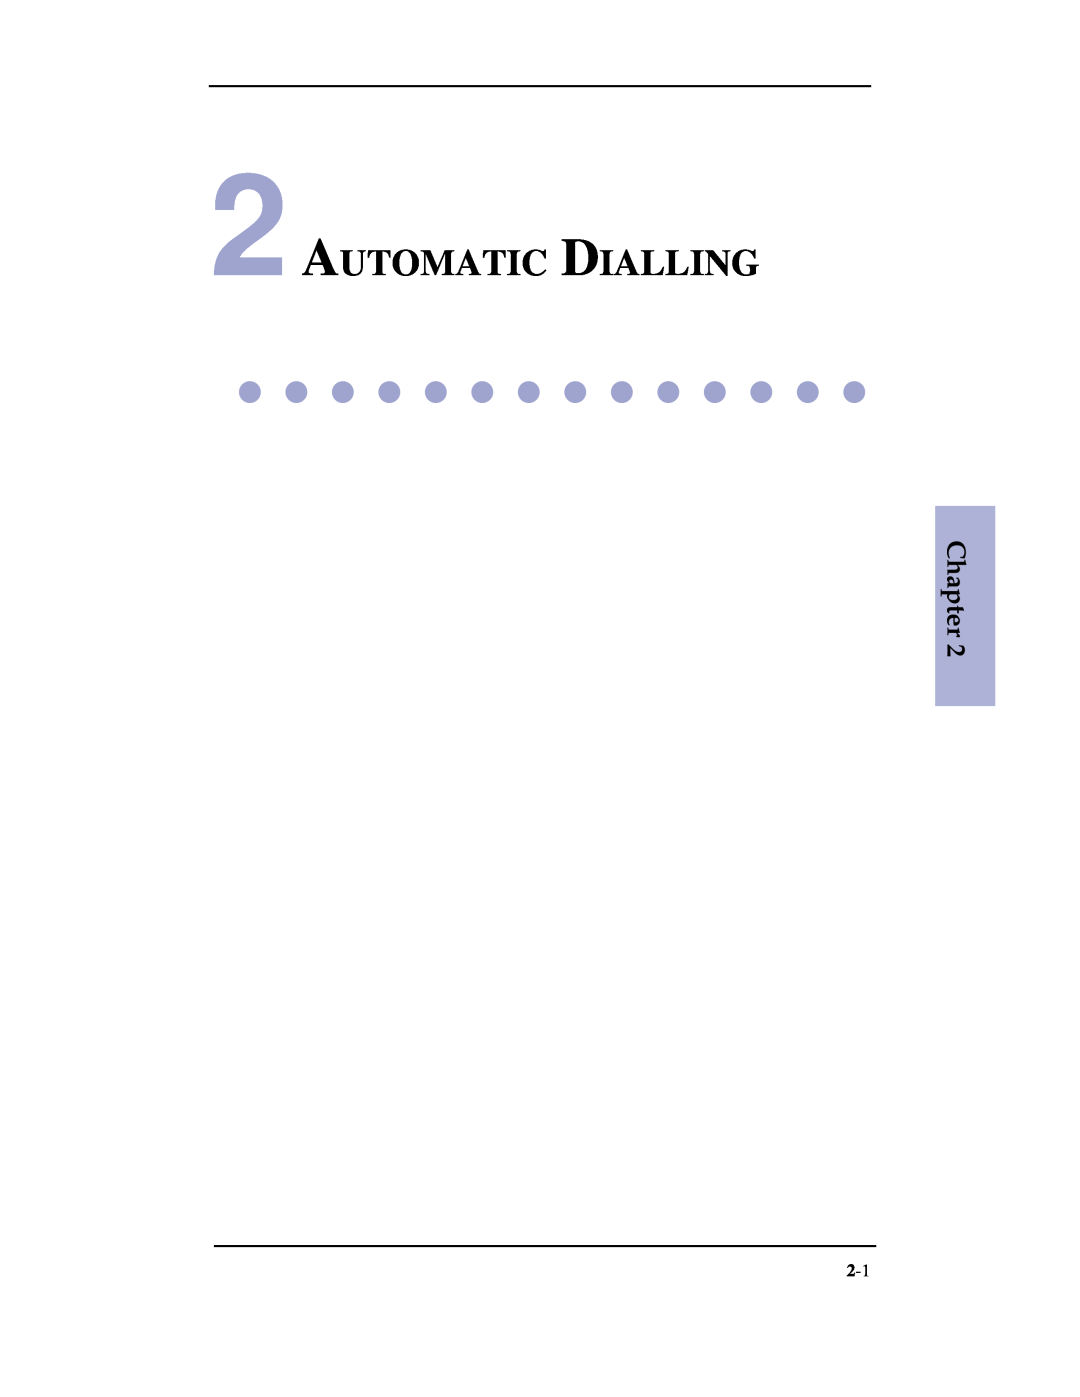 Samsung SF-3100 manual Automatic Dialling, Chapter 